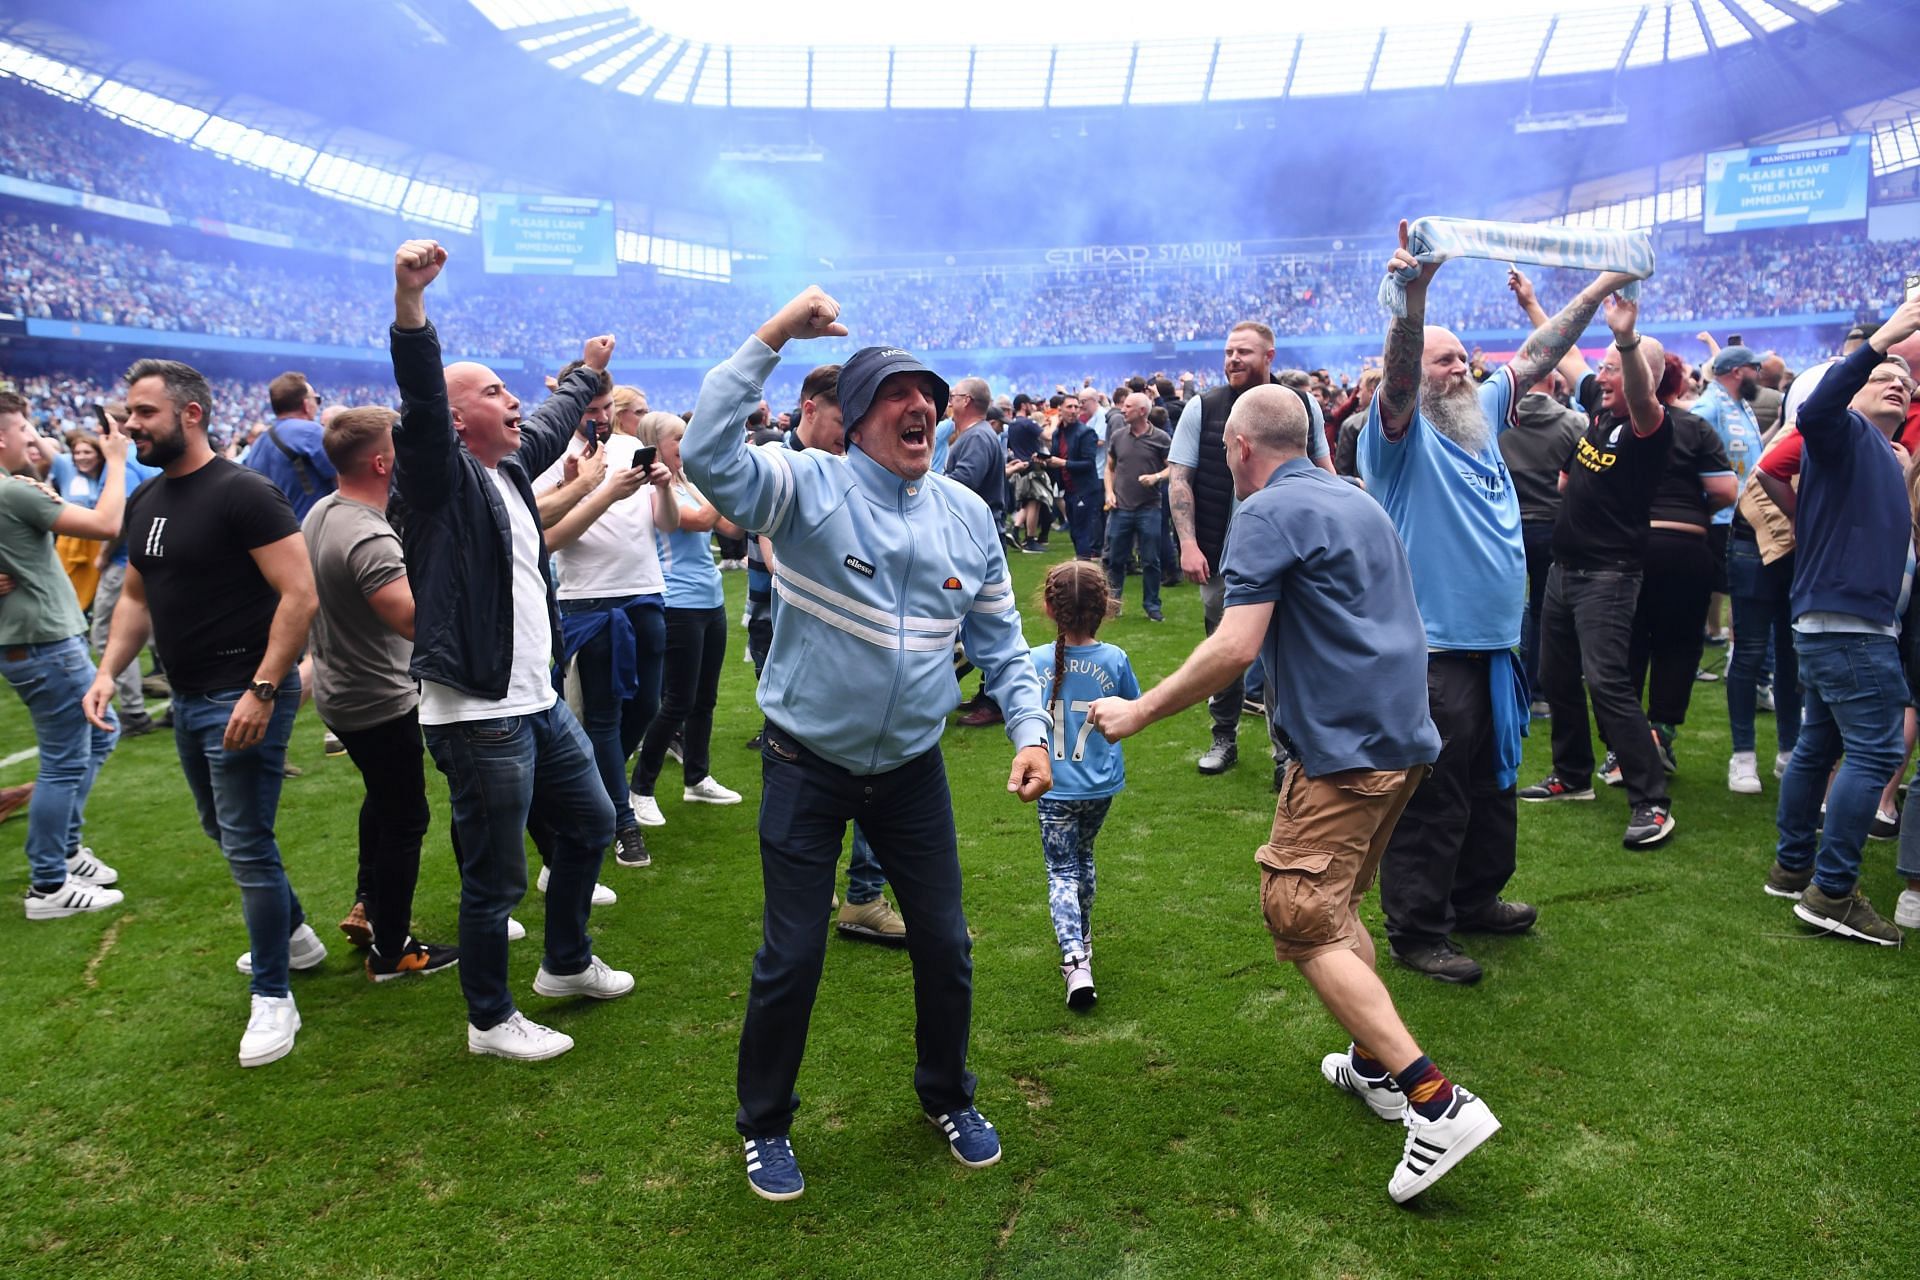 Manchester City fans celebrating after their team&#039;s win